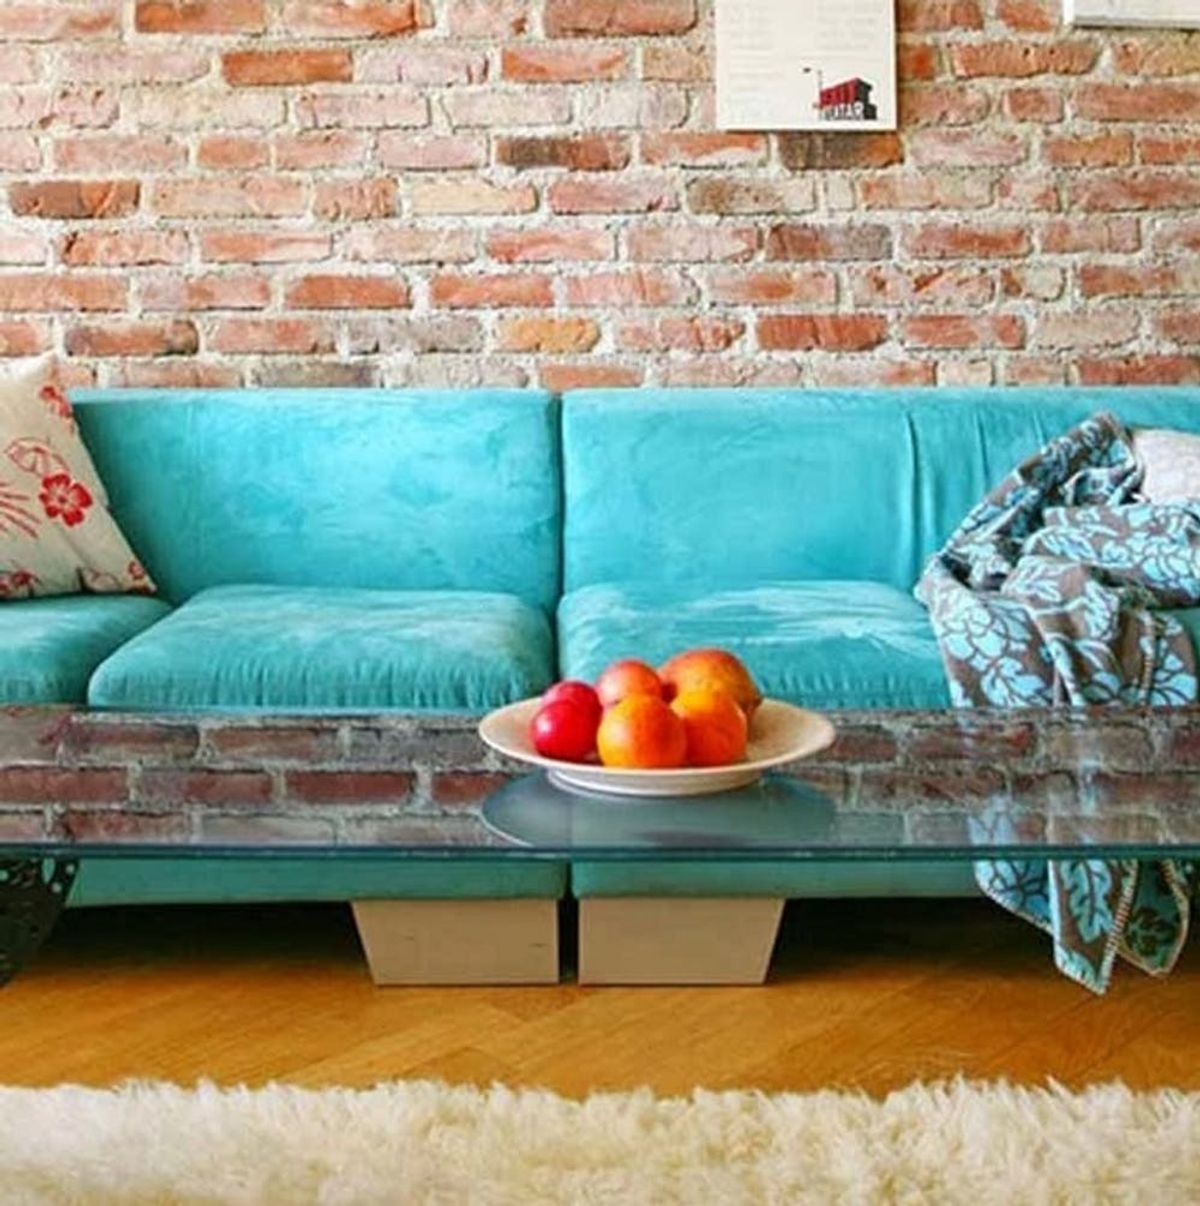 13 Creative Ideas for Decorating With an Exposed Brick Wall